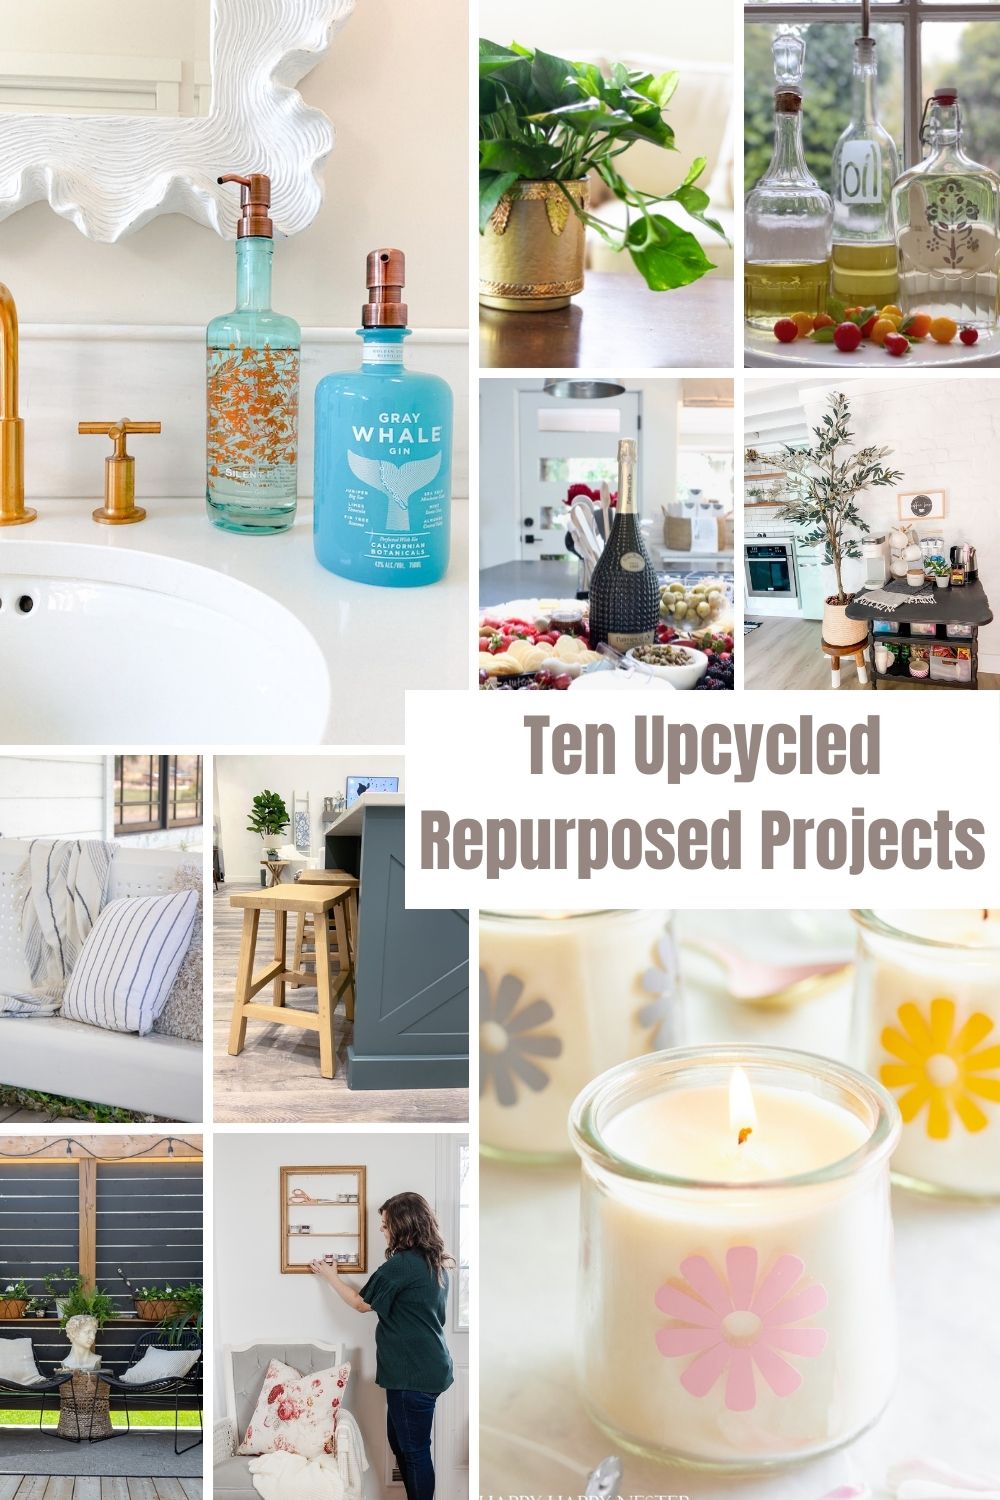 Ten Upcycled Repurposed Projects graphic.